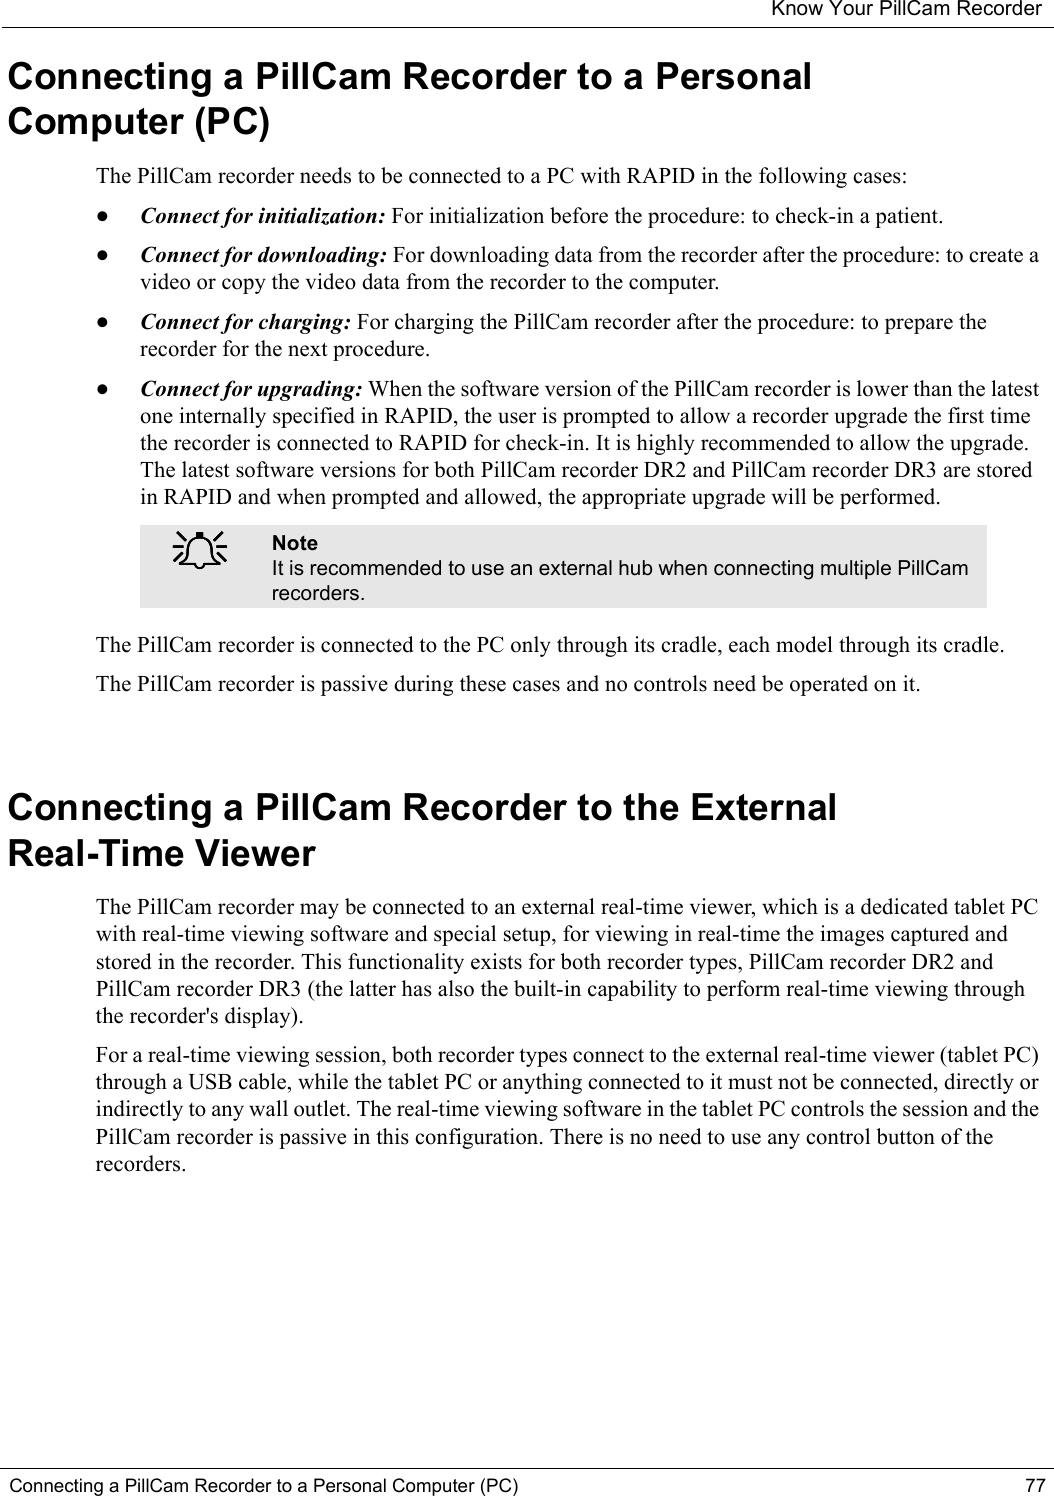 Know Your PillCam RecorderConnecting a PillCam Recorder to a Personal Computer (PC) 77Connecting a PillCam Recorder to a Personal Computer (PC)The PillCam recorder needs to be connected to a PC with RAPID in the following cases:•Connect for initialization: For initialization before the procedure: to check-in a patient.•Connect for downloading: For downloading data from the recorder after the procedure: to create a video or copy the video data from the recorder to the computer.•Connect for charging: For charging the PillCam recorder after the procedure: to prepare the recorder for the next procedure.•Connect for upgrading: When the software version of the PillCam recorder is lower than the latest one internally specified in RAPID, the user is prompted to allow a recorder upgrade the first time the recorder is connected to RAPID for check-in. It is highly recommended to allow the upgrade. The latest software versions for both PillCam recorder DR2 and PillCam recorder DR3 are stored in RAPID and when prompted and allowed, the appropriate upgrade will be performed.The PillCam recorder is connected to the PC only through its cradle, each model through its cradle.The PillCam recorder is passive during these cases and no controls need be operated on it.Connecting a PillCam Recorder to the External Real-Time ViewerThe PillCam recorder may be connected to an external real-time viewer, which is a dedicated tablet PC with real-time viewing software and special setup, for viewing in real-time the images captured and stored in the recorder. This functionality exists for both recorder types, PillCam recorder DR2 and PillCam recorder DR3 (the latter has also the built-in capability to perform real-time viewing through the recorder&apos;s display).For a real-time viewing session, both recorder types connect to the external real-time viewer (tablet PC) through a USB cable, while the tablet PC or anything connected to it must not be connected, directly or indirectly to any wall outlet. The real-time viewing software in the tablet PC controls the session and the PillCam recorder is passive in this configuration. There is no need to use any control button of the recorders. ֠֠֠֠NoteIt is recommended to use an external hub when connecting multiple PillCam recorders.